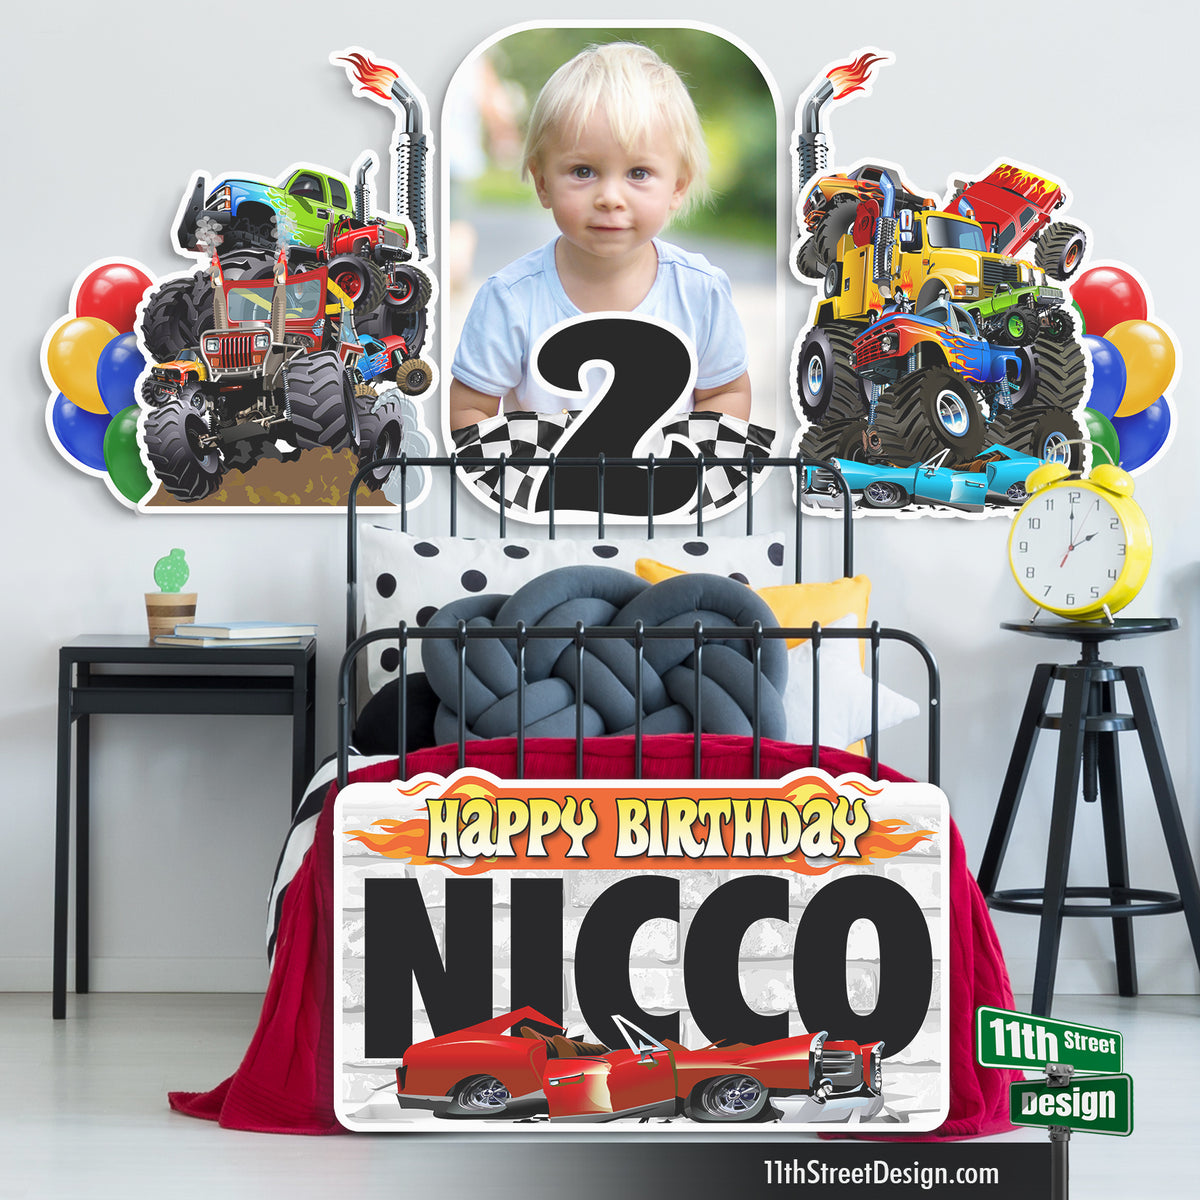 Personalized Monster Trucks Birthday Photo Lawn Signs, The Perfect Yard Decor For Your Party, Weatherproof for outside displays